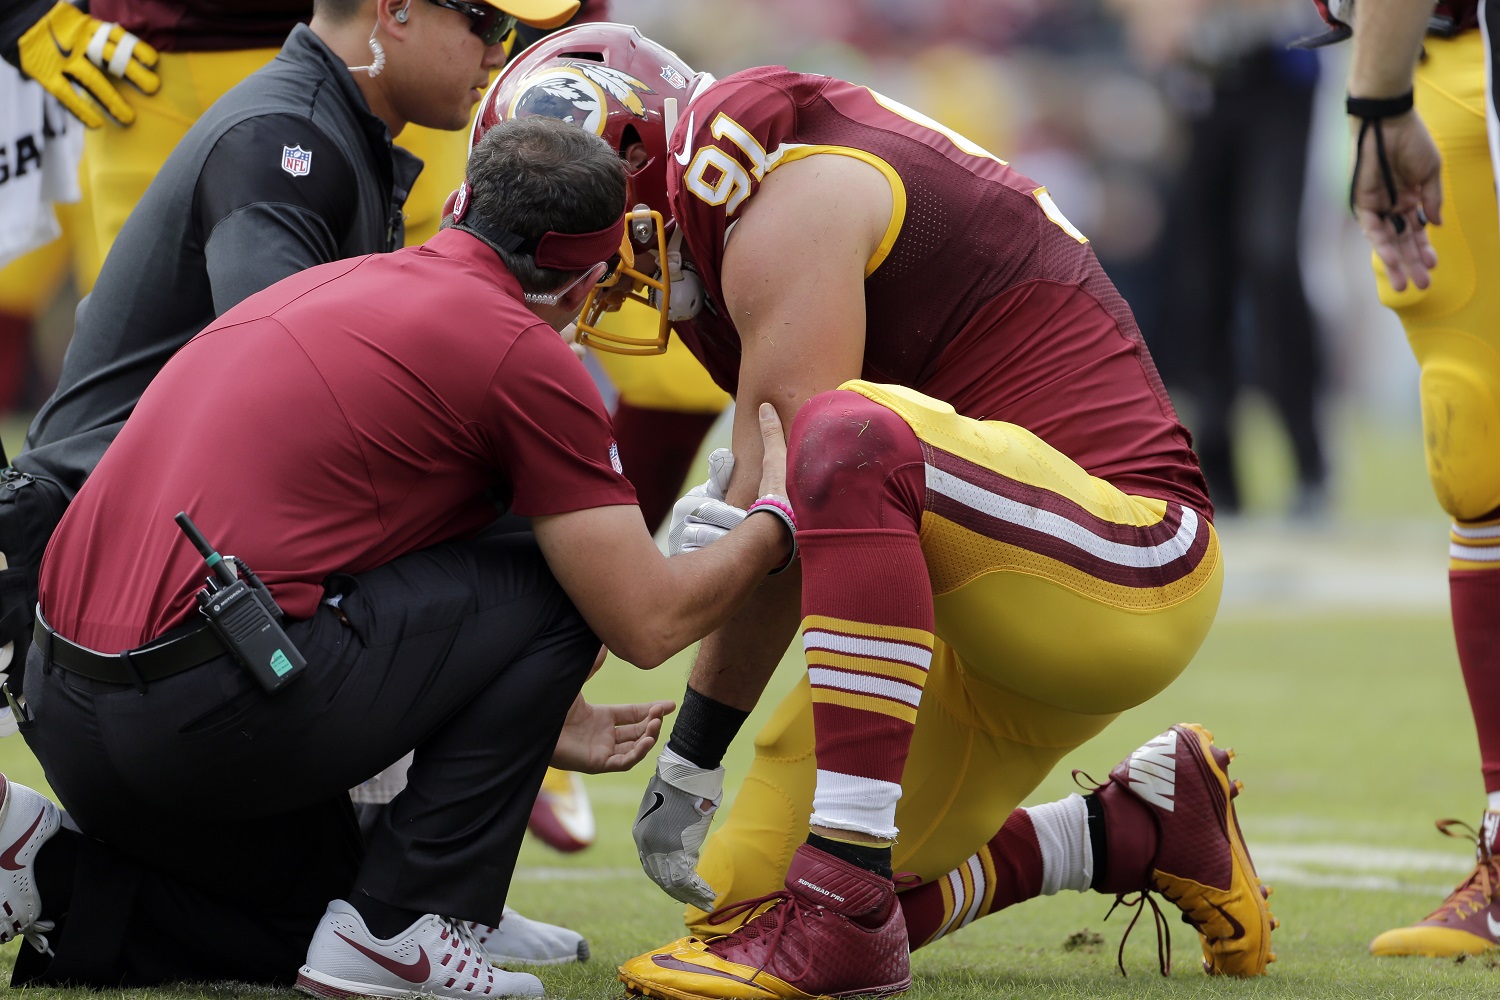 Washington Redskins outside linebacker Ryan Kerrigan (91) is assisted after an injury during the first half of an NFL football game against the Cleveland Browns, Sunday, Oct. 2, 2016, in Landover, Md. (AP Photo/Mark Tenally)